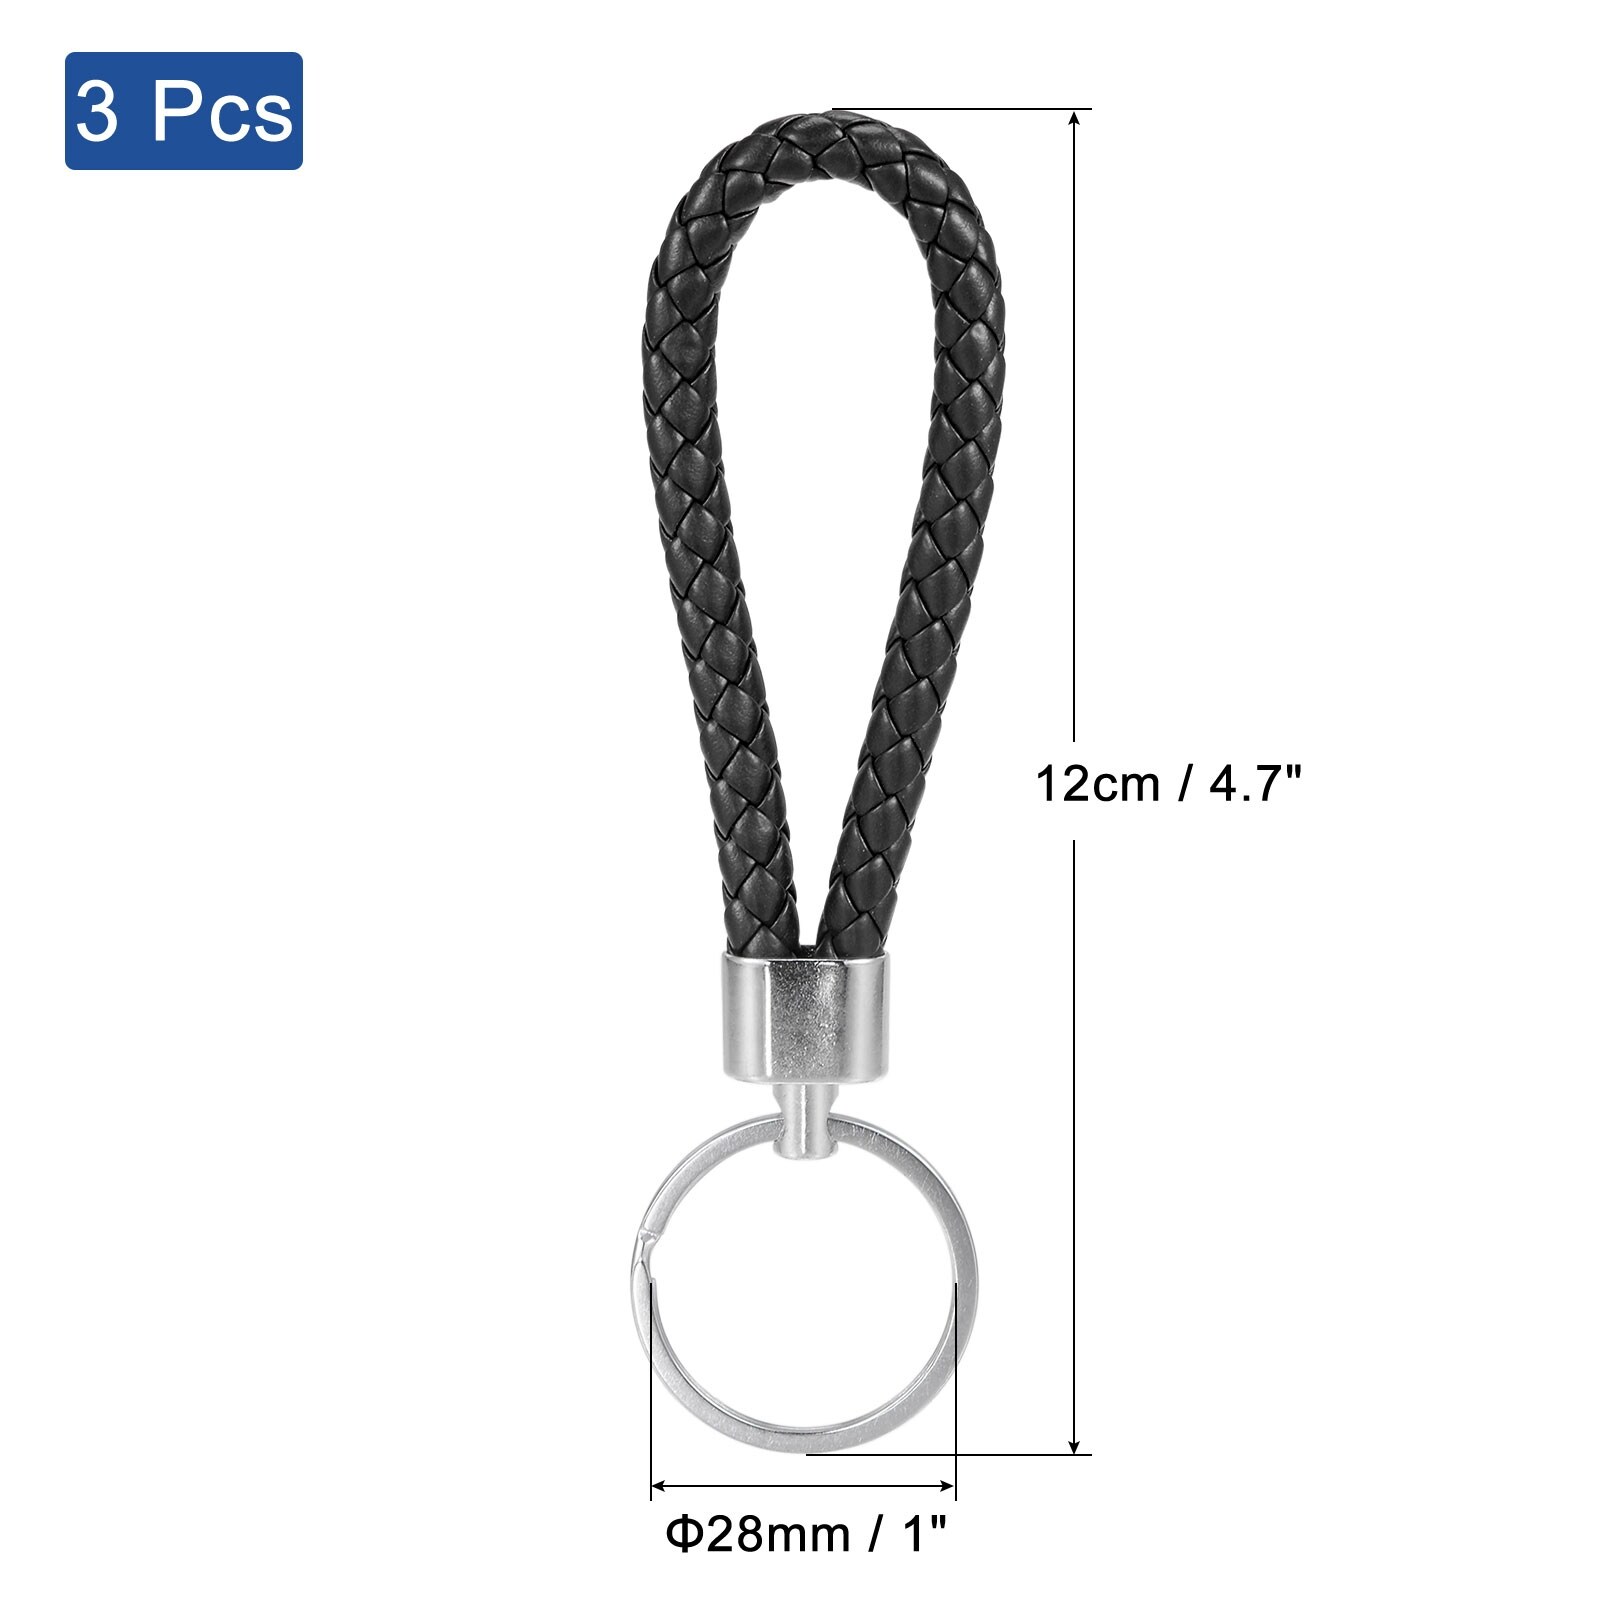 3 Pcs Keychain With Carabiner, Braided Cord Ring Carabiner For